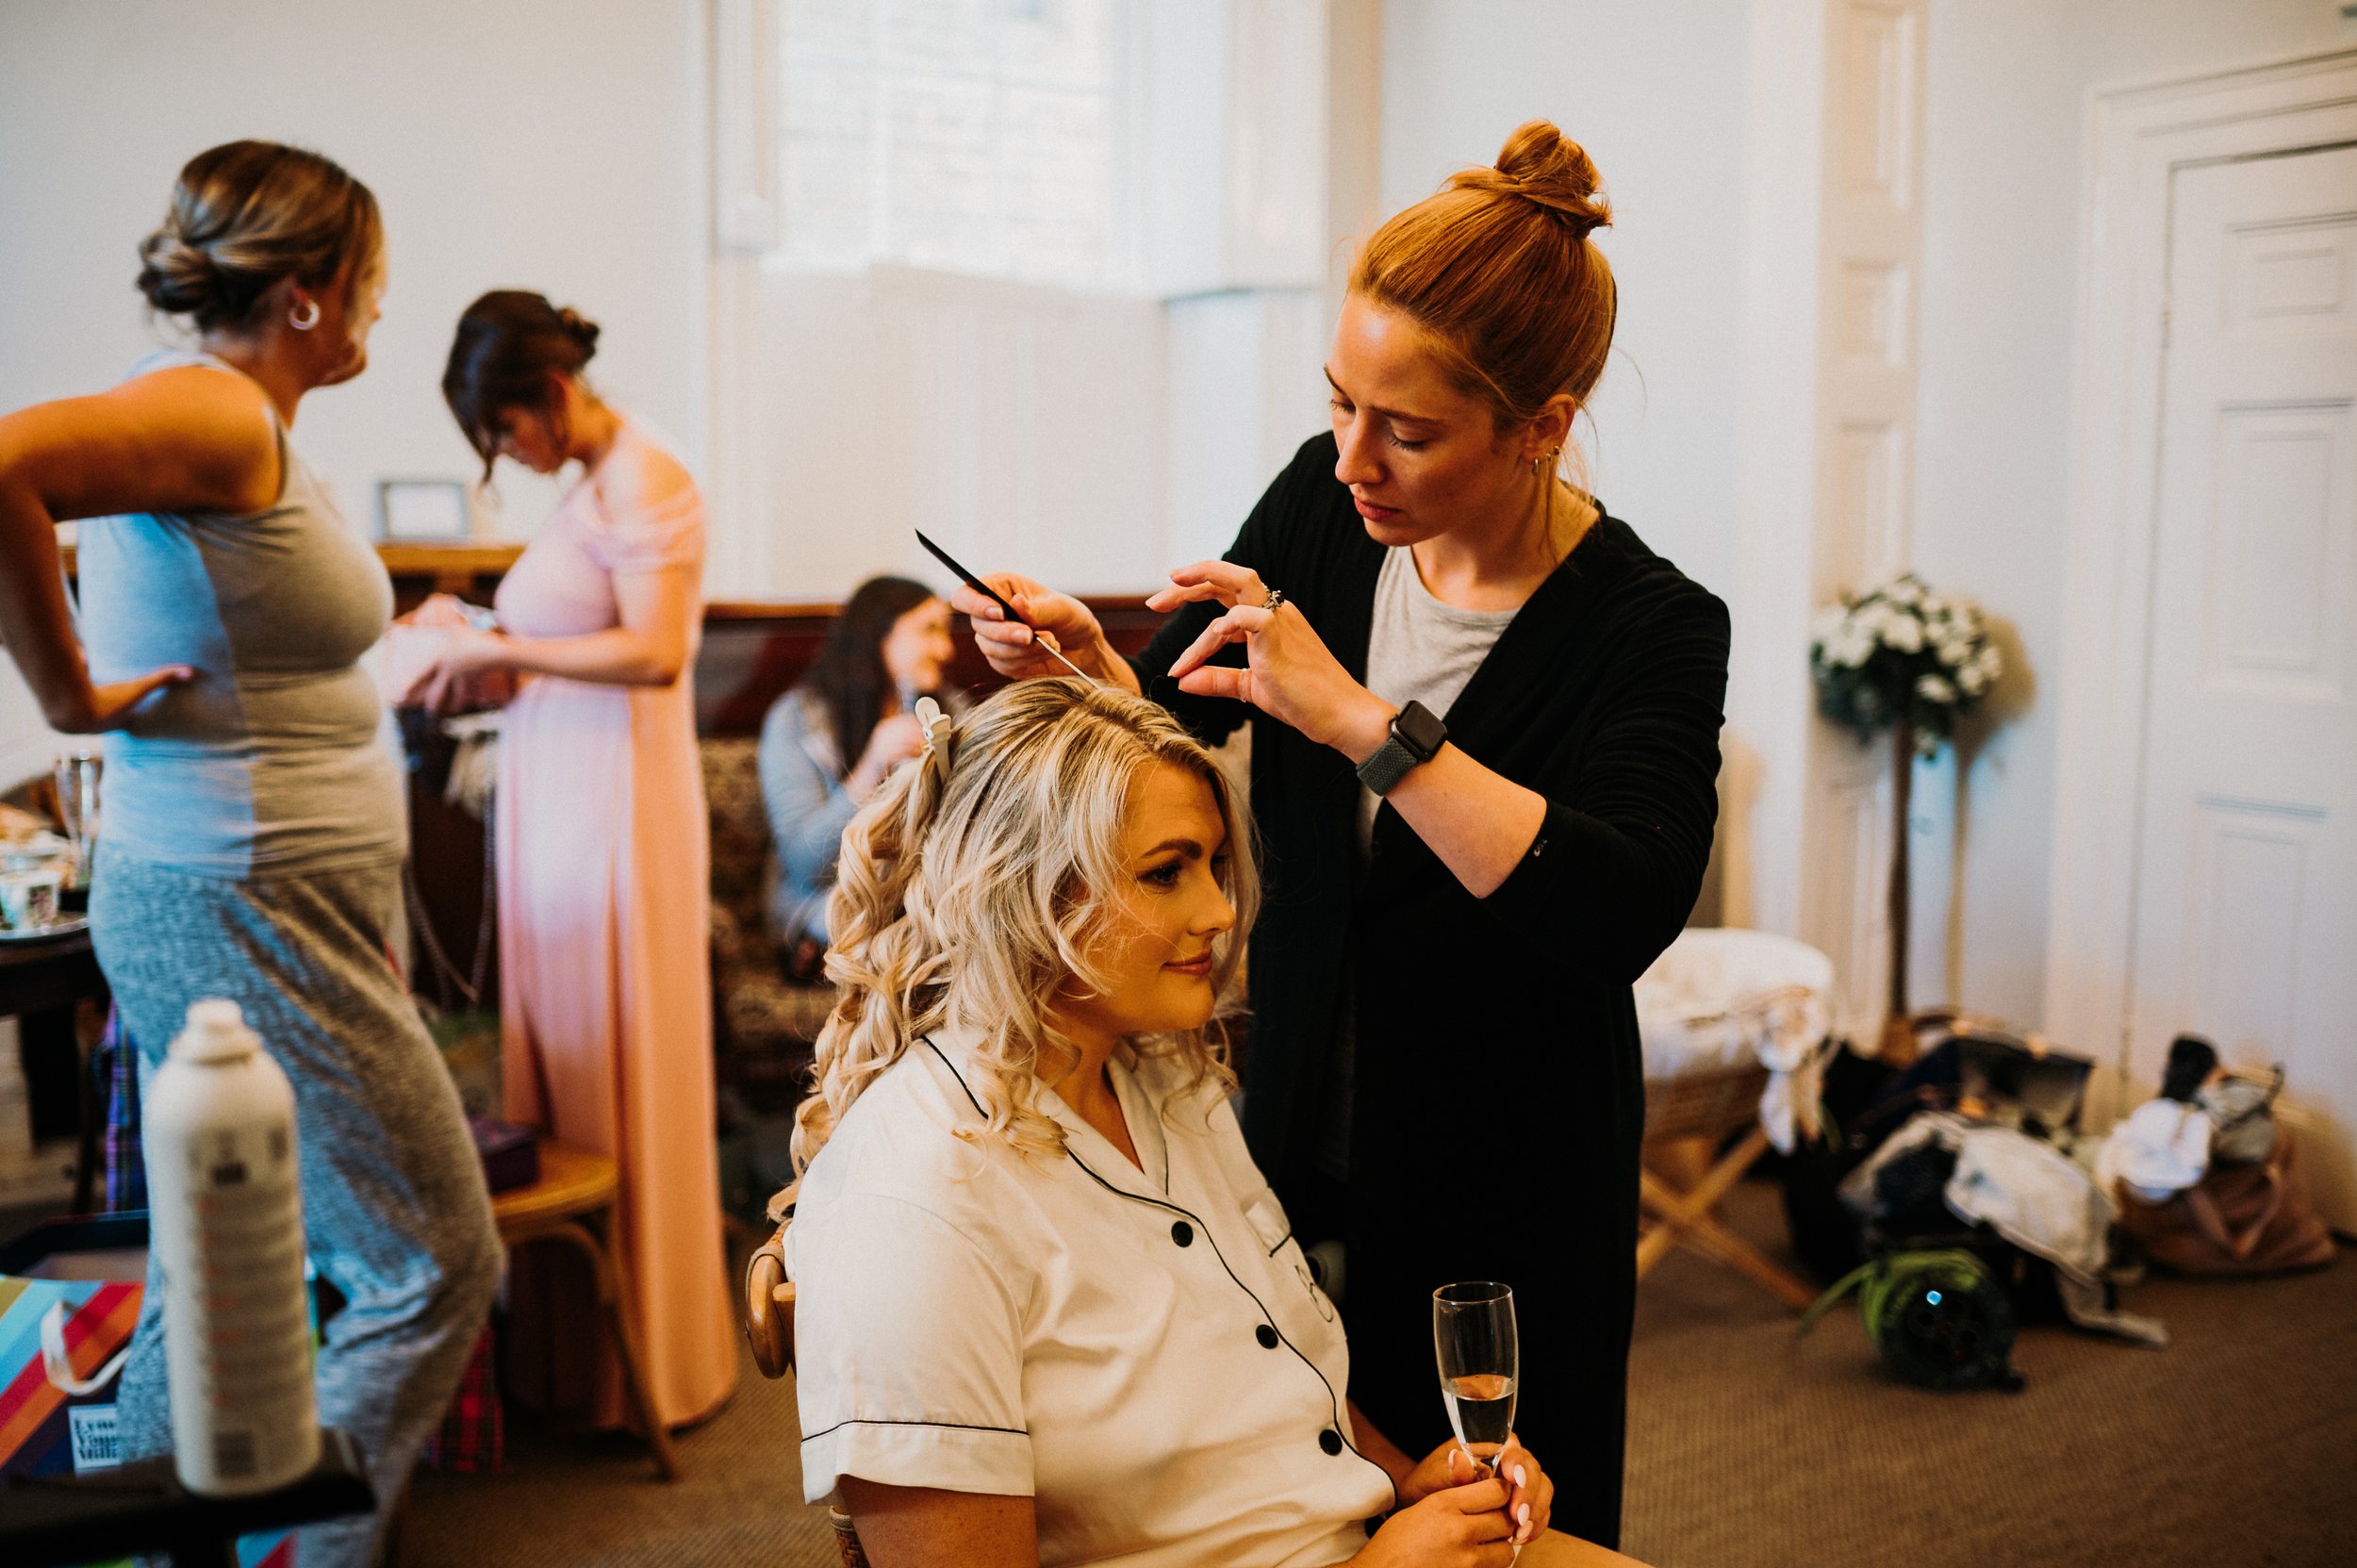 The bride has her hair done on the morning of their wedding.